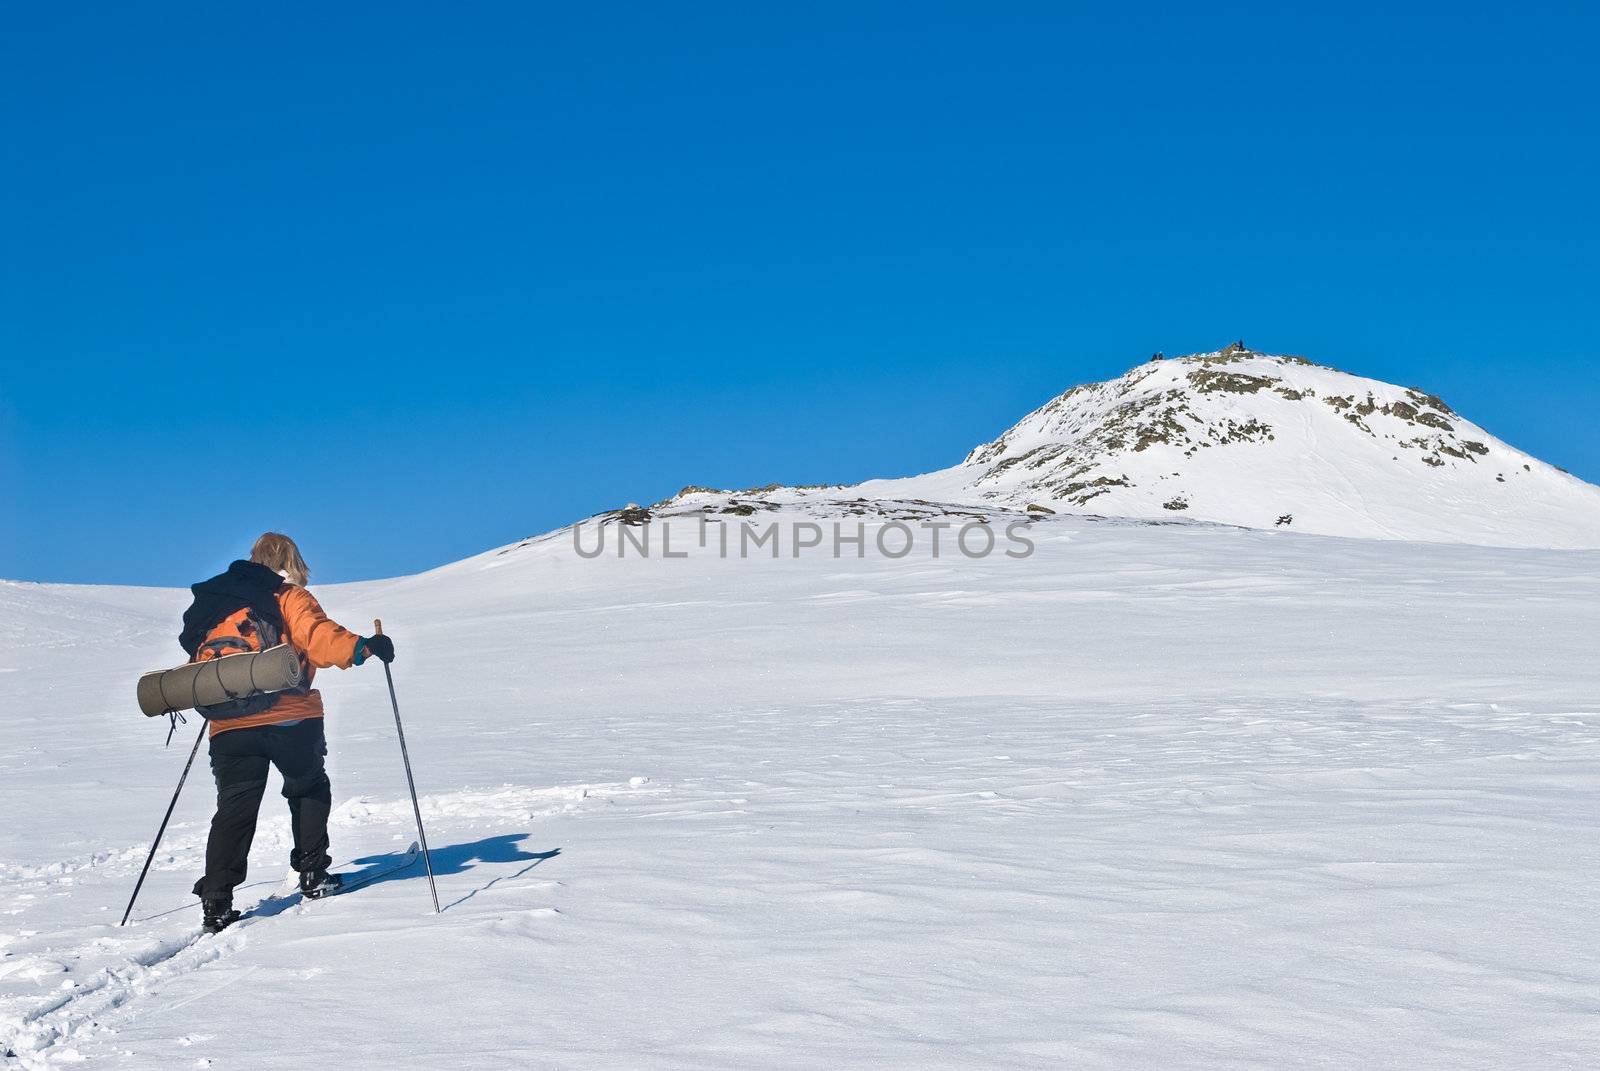 Single skier who is climping for the top. Woman mid 50's and a clear blue sky. Picture taken in Oppdal, Norway.